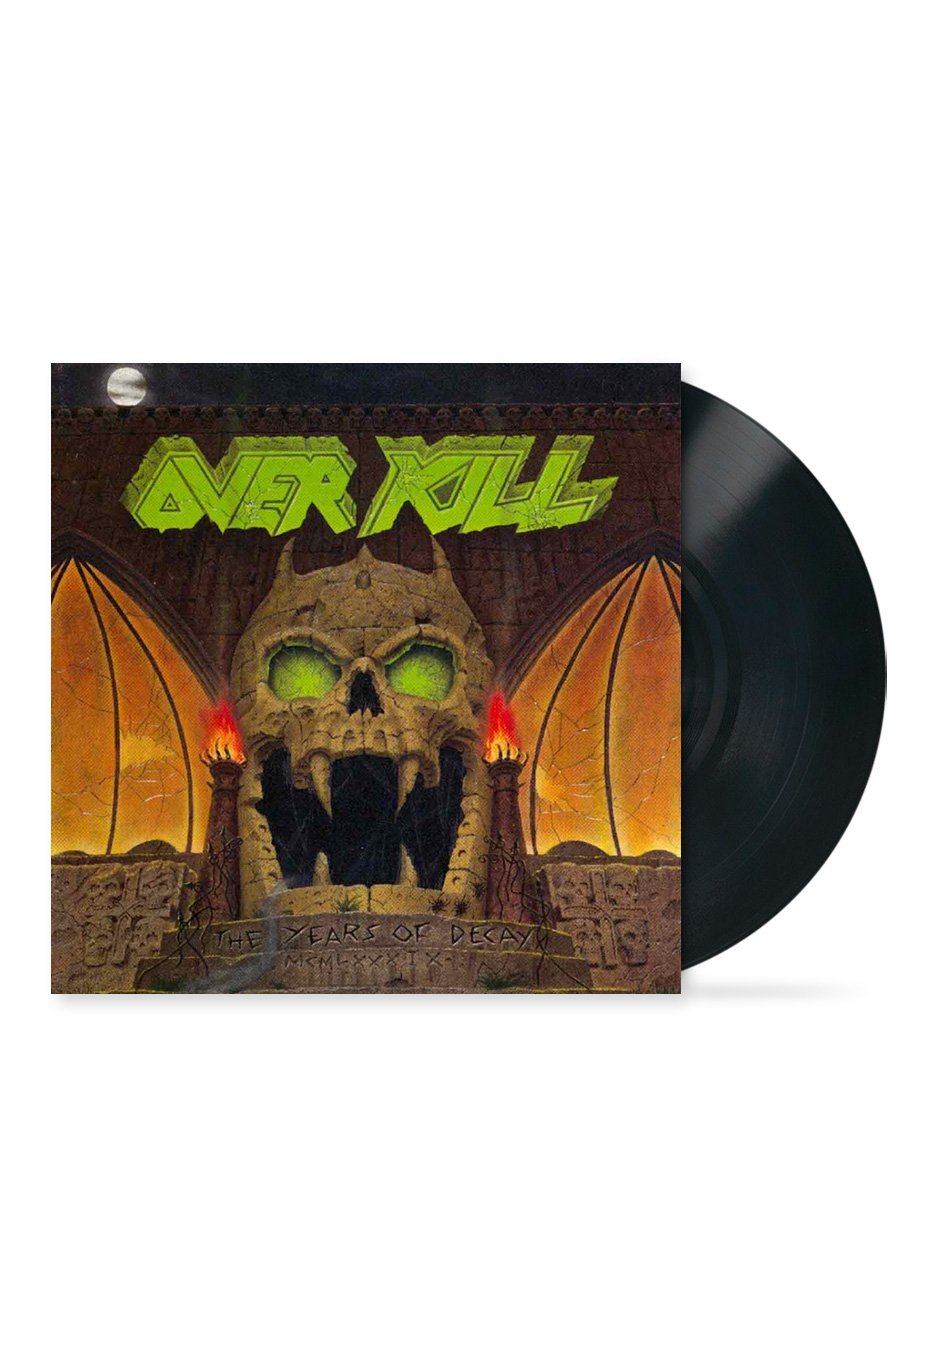 Overkill - The Years Of Decay - Vinyl